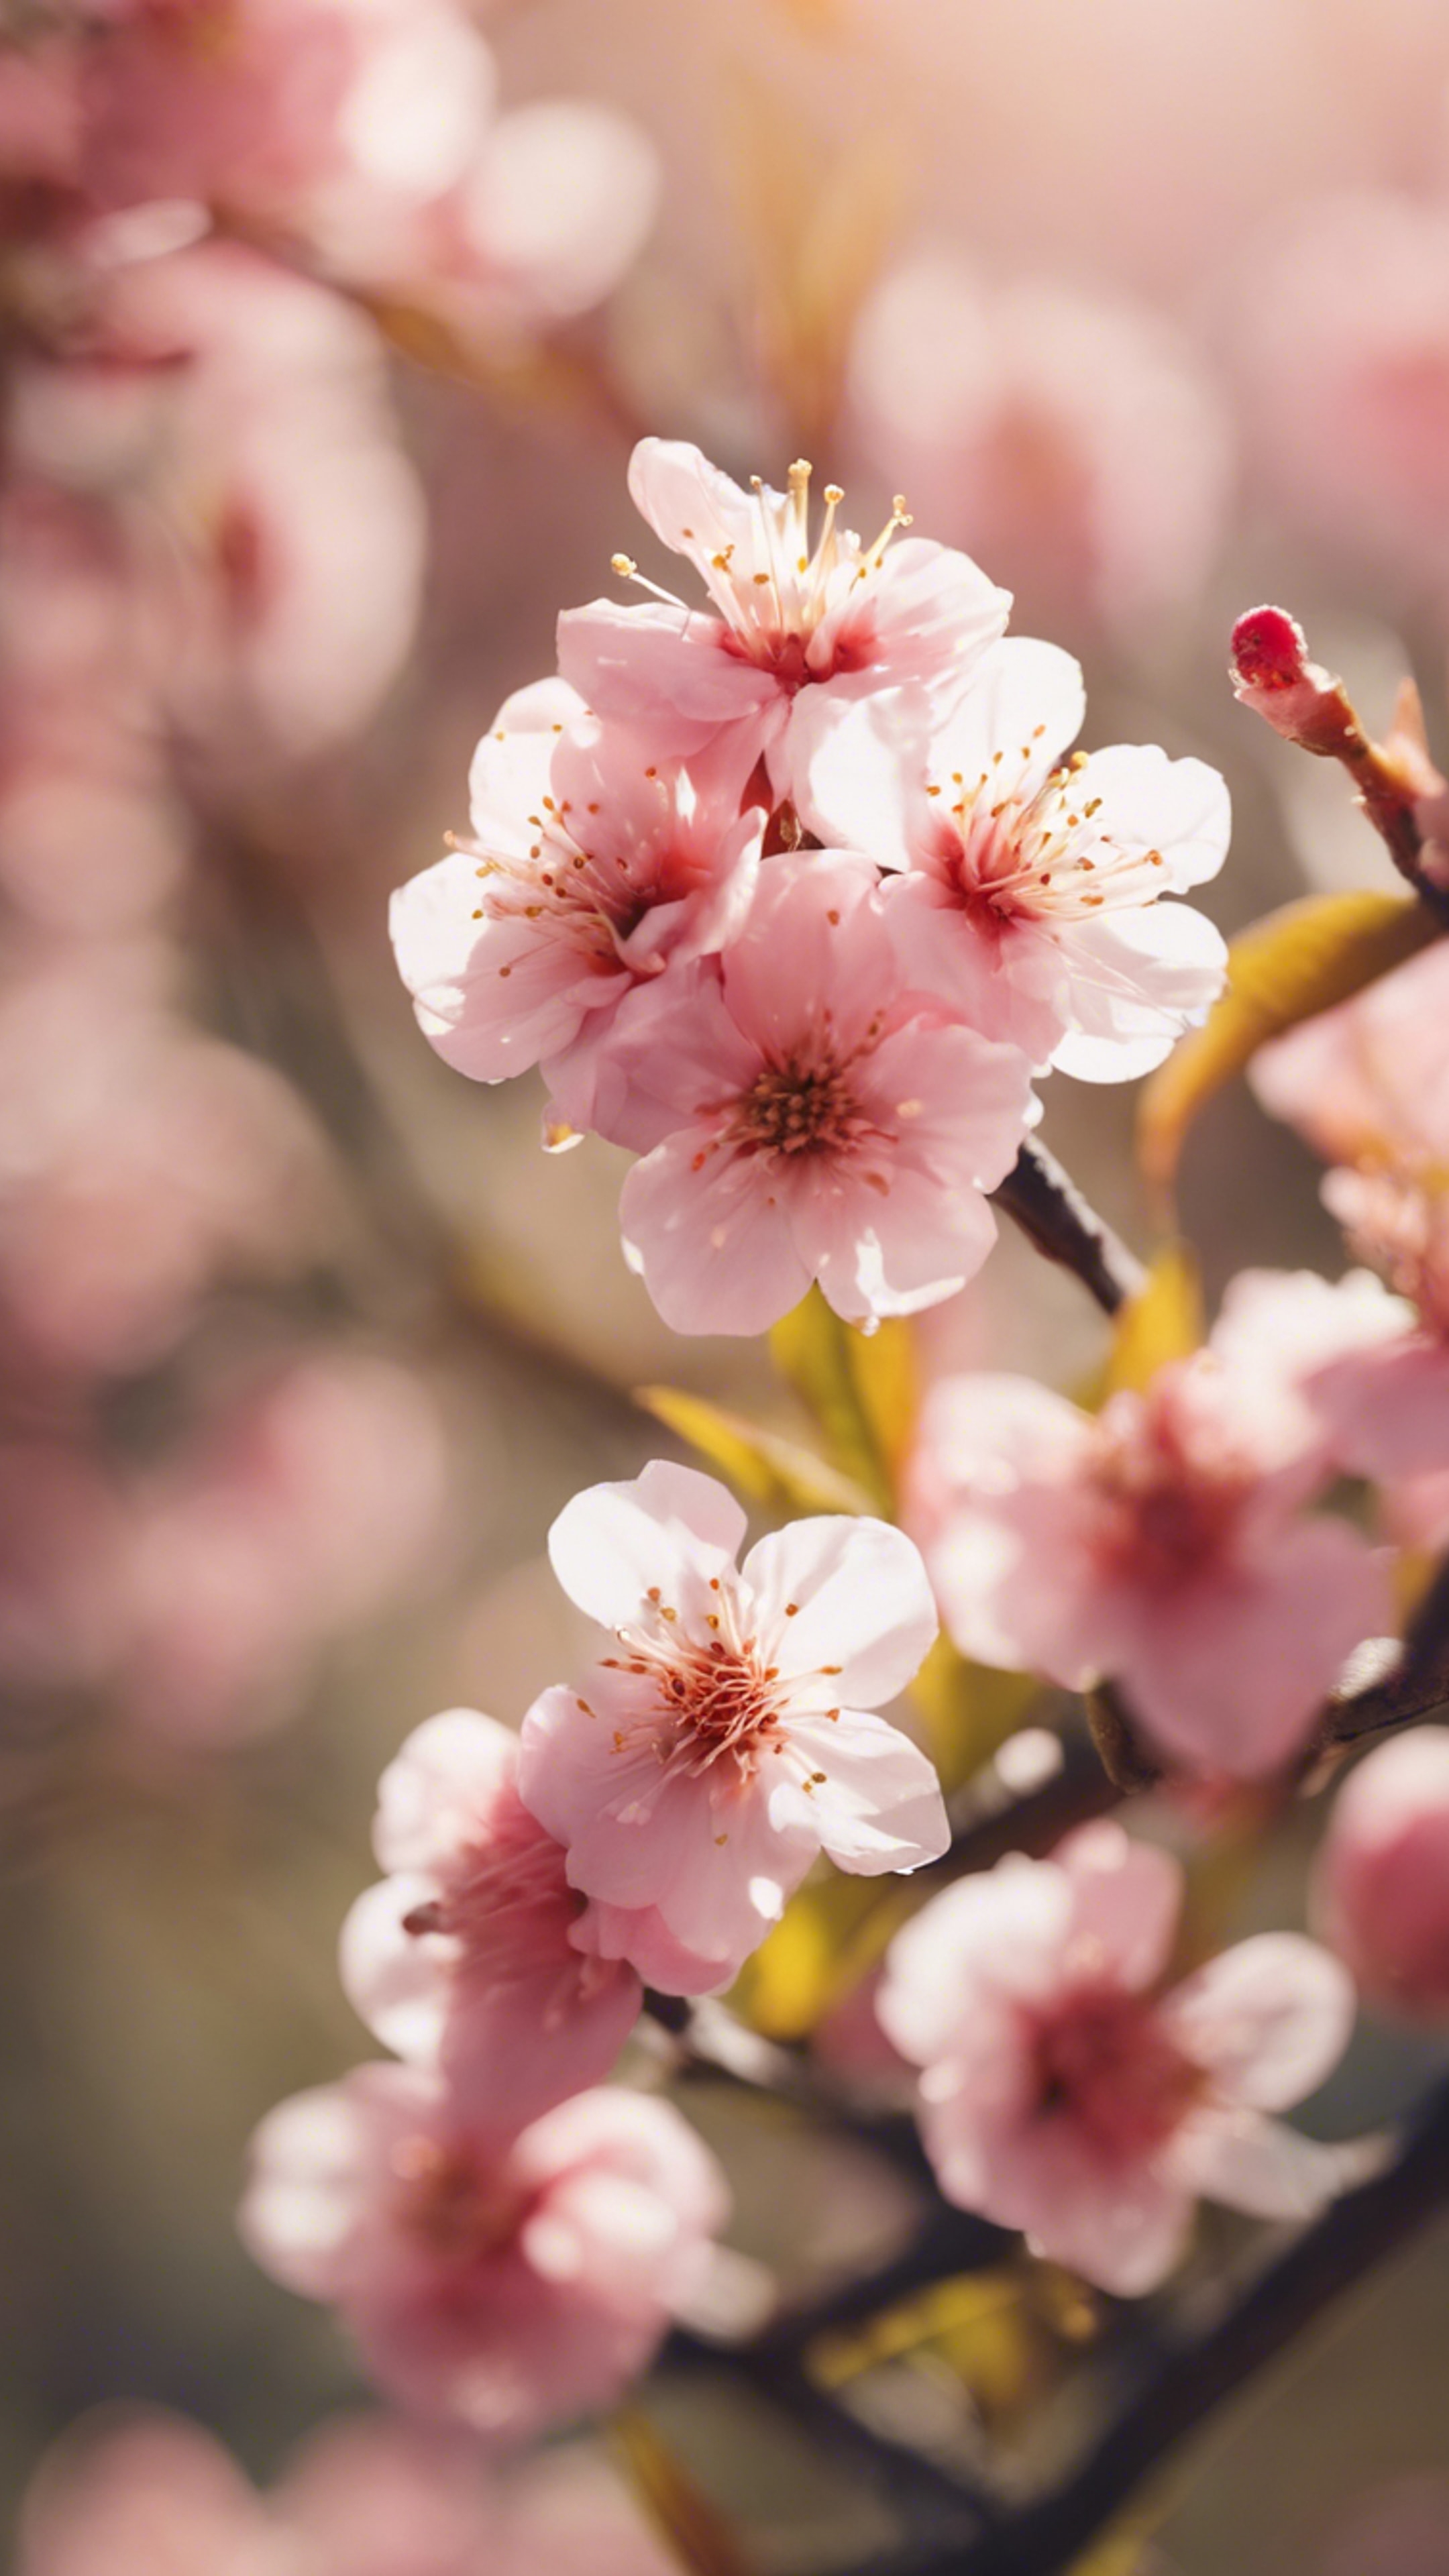 A close-up of happy peach flowers blooming cheerfully on a sunny spring day. Wallpaper[9ab03d009b524efe8bfb]